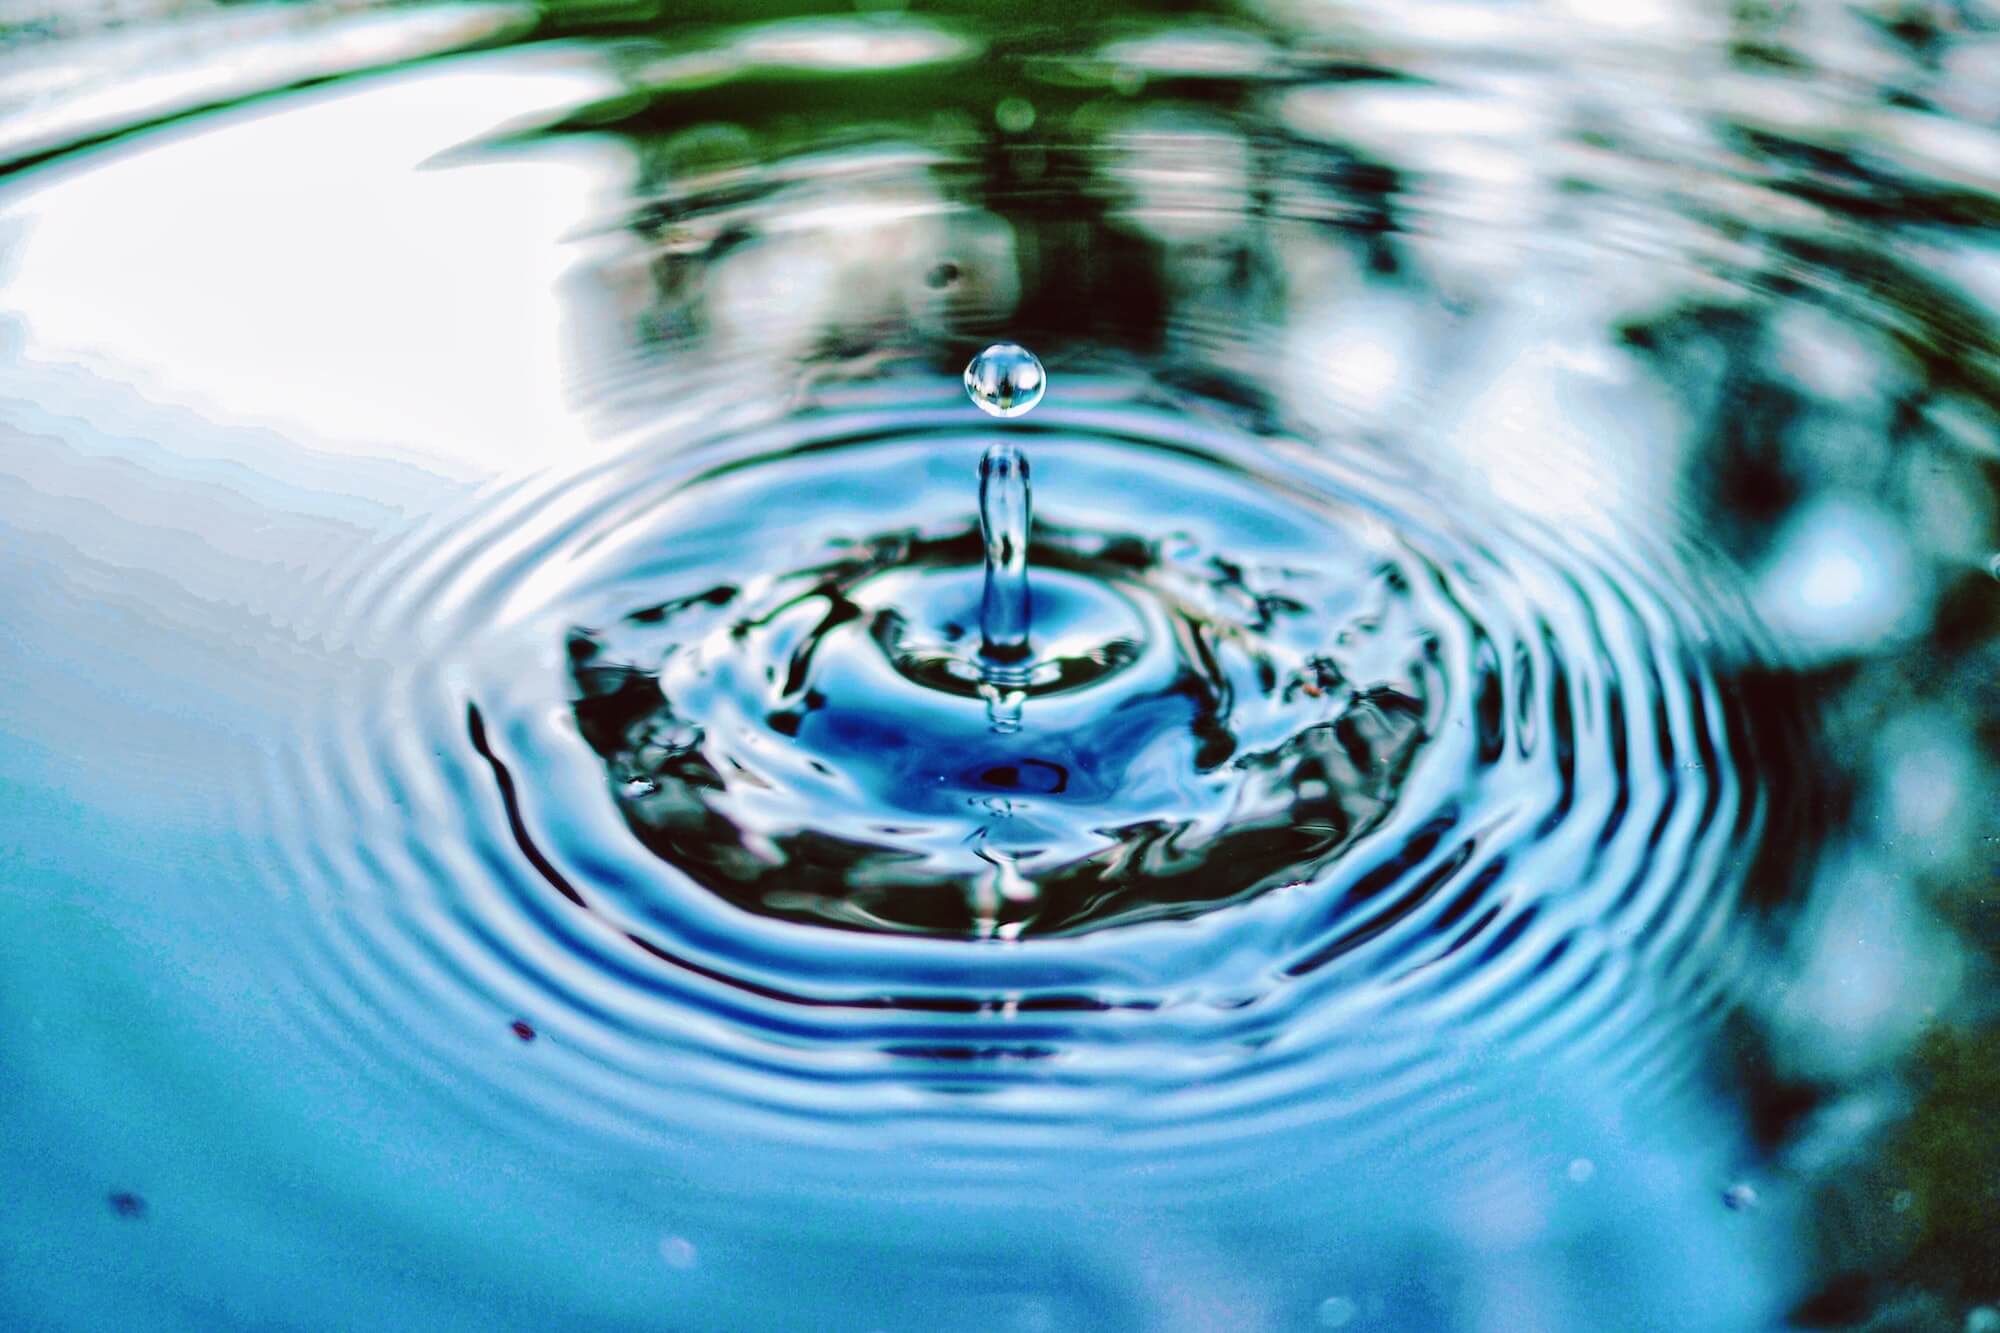 Ripple-effect-droplet-image